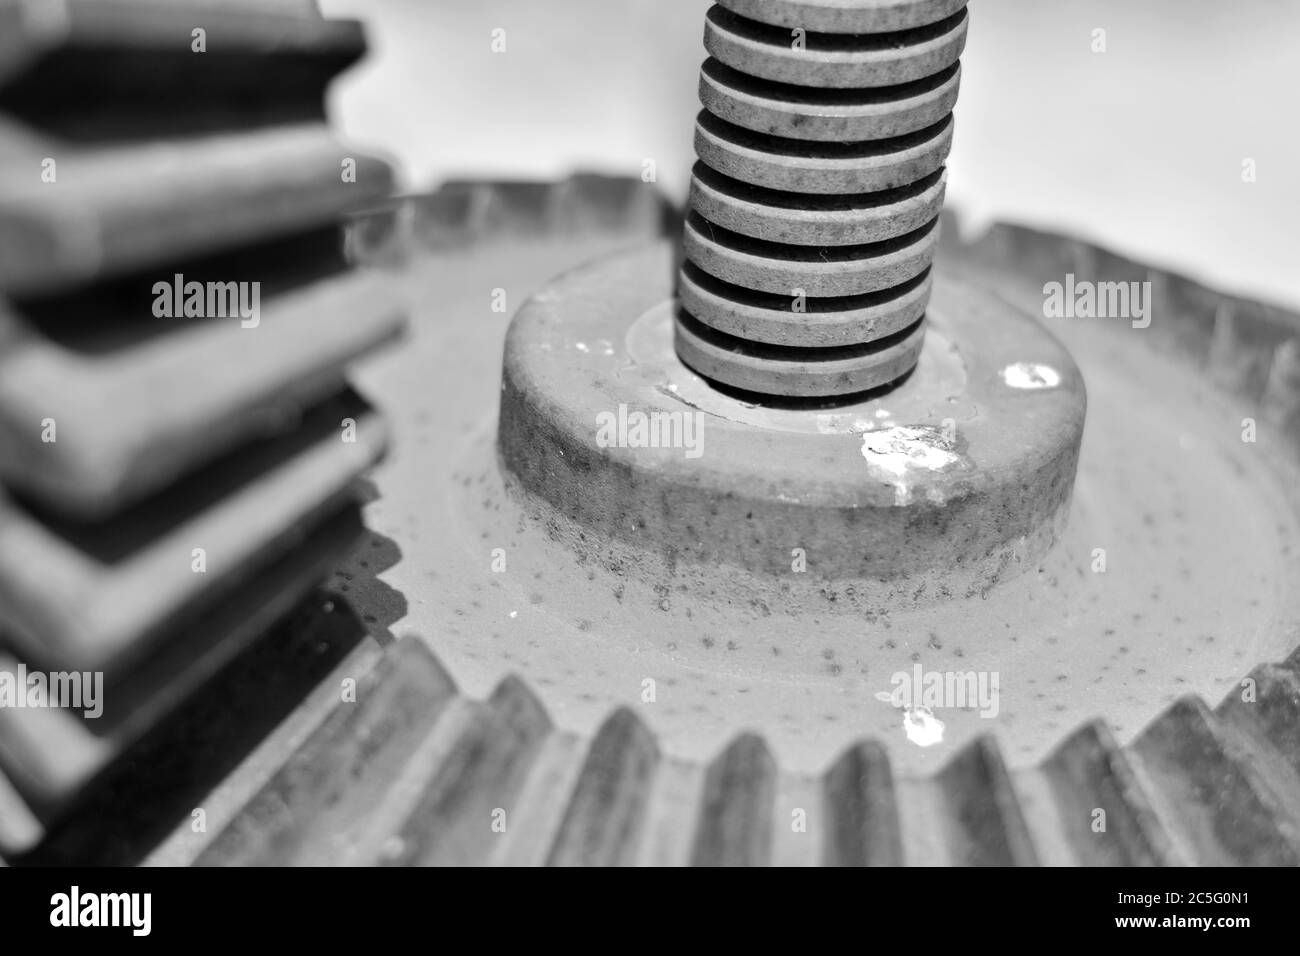 Screw and steel gears of an old mechanical device Stock Photo